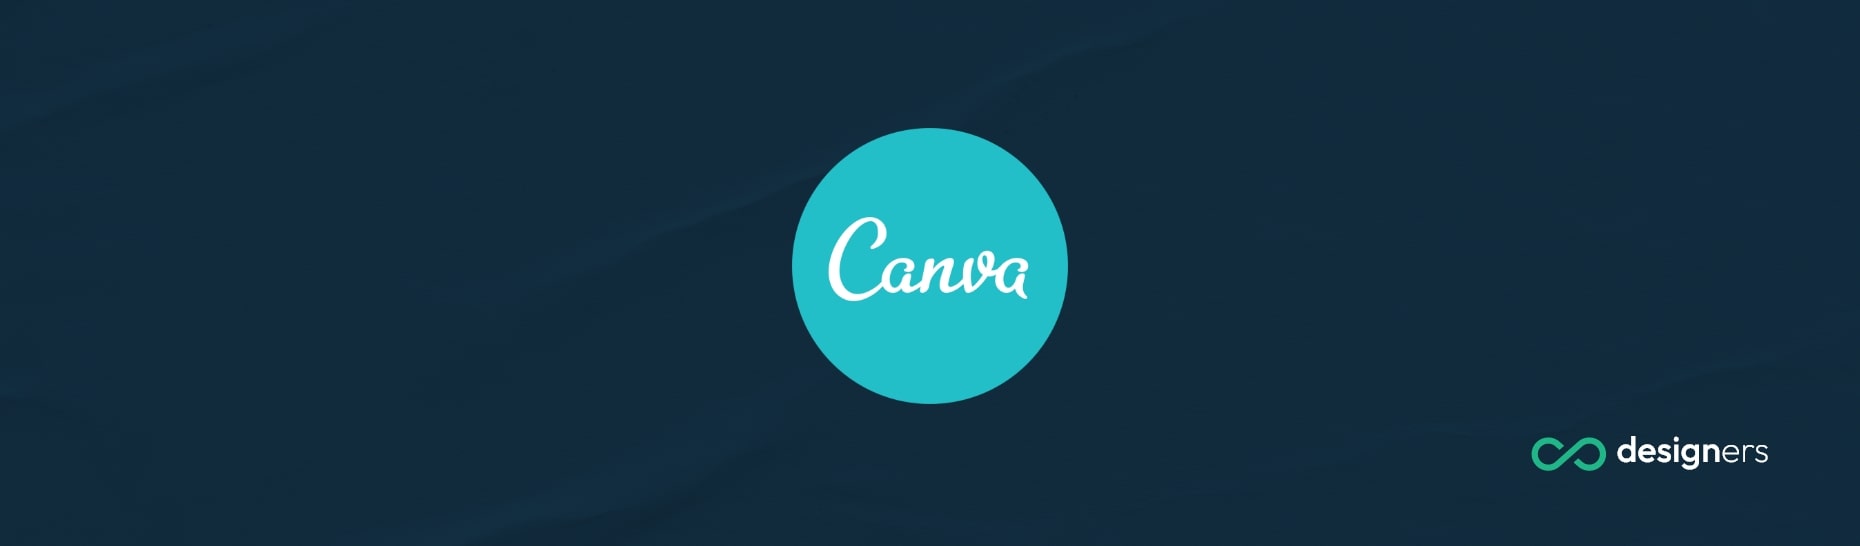 How Do You Paint With Canva?